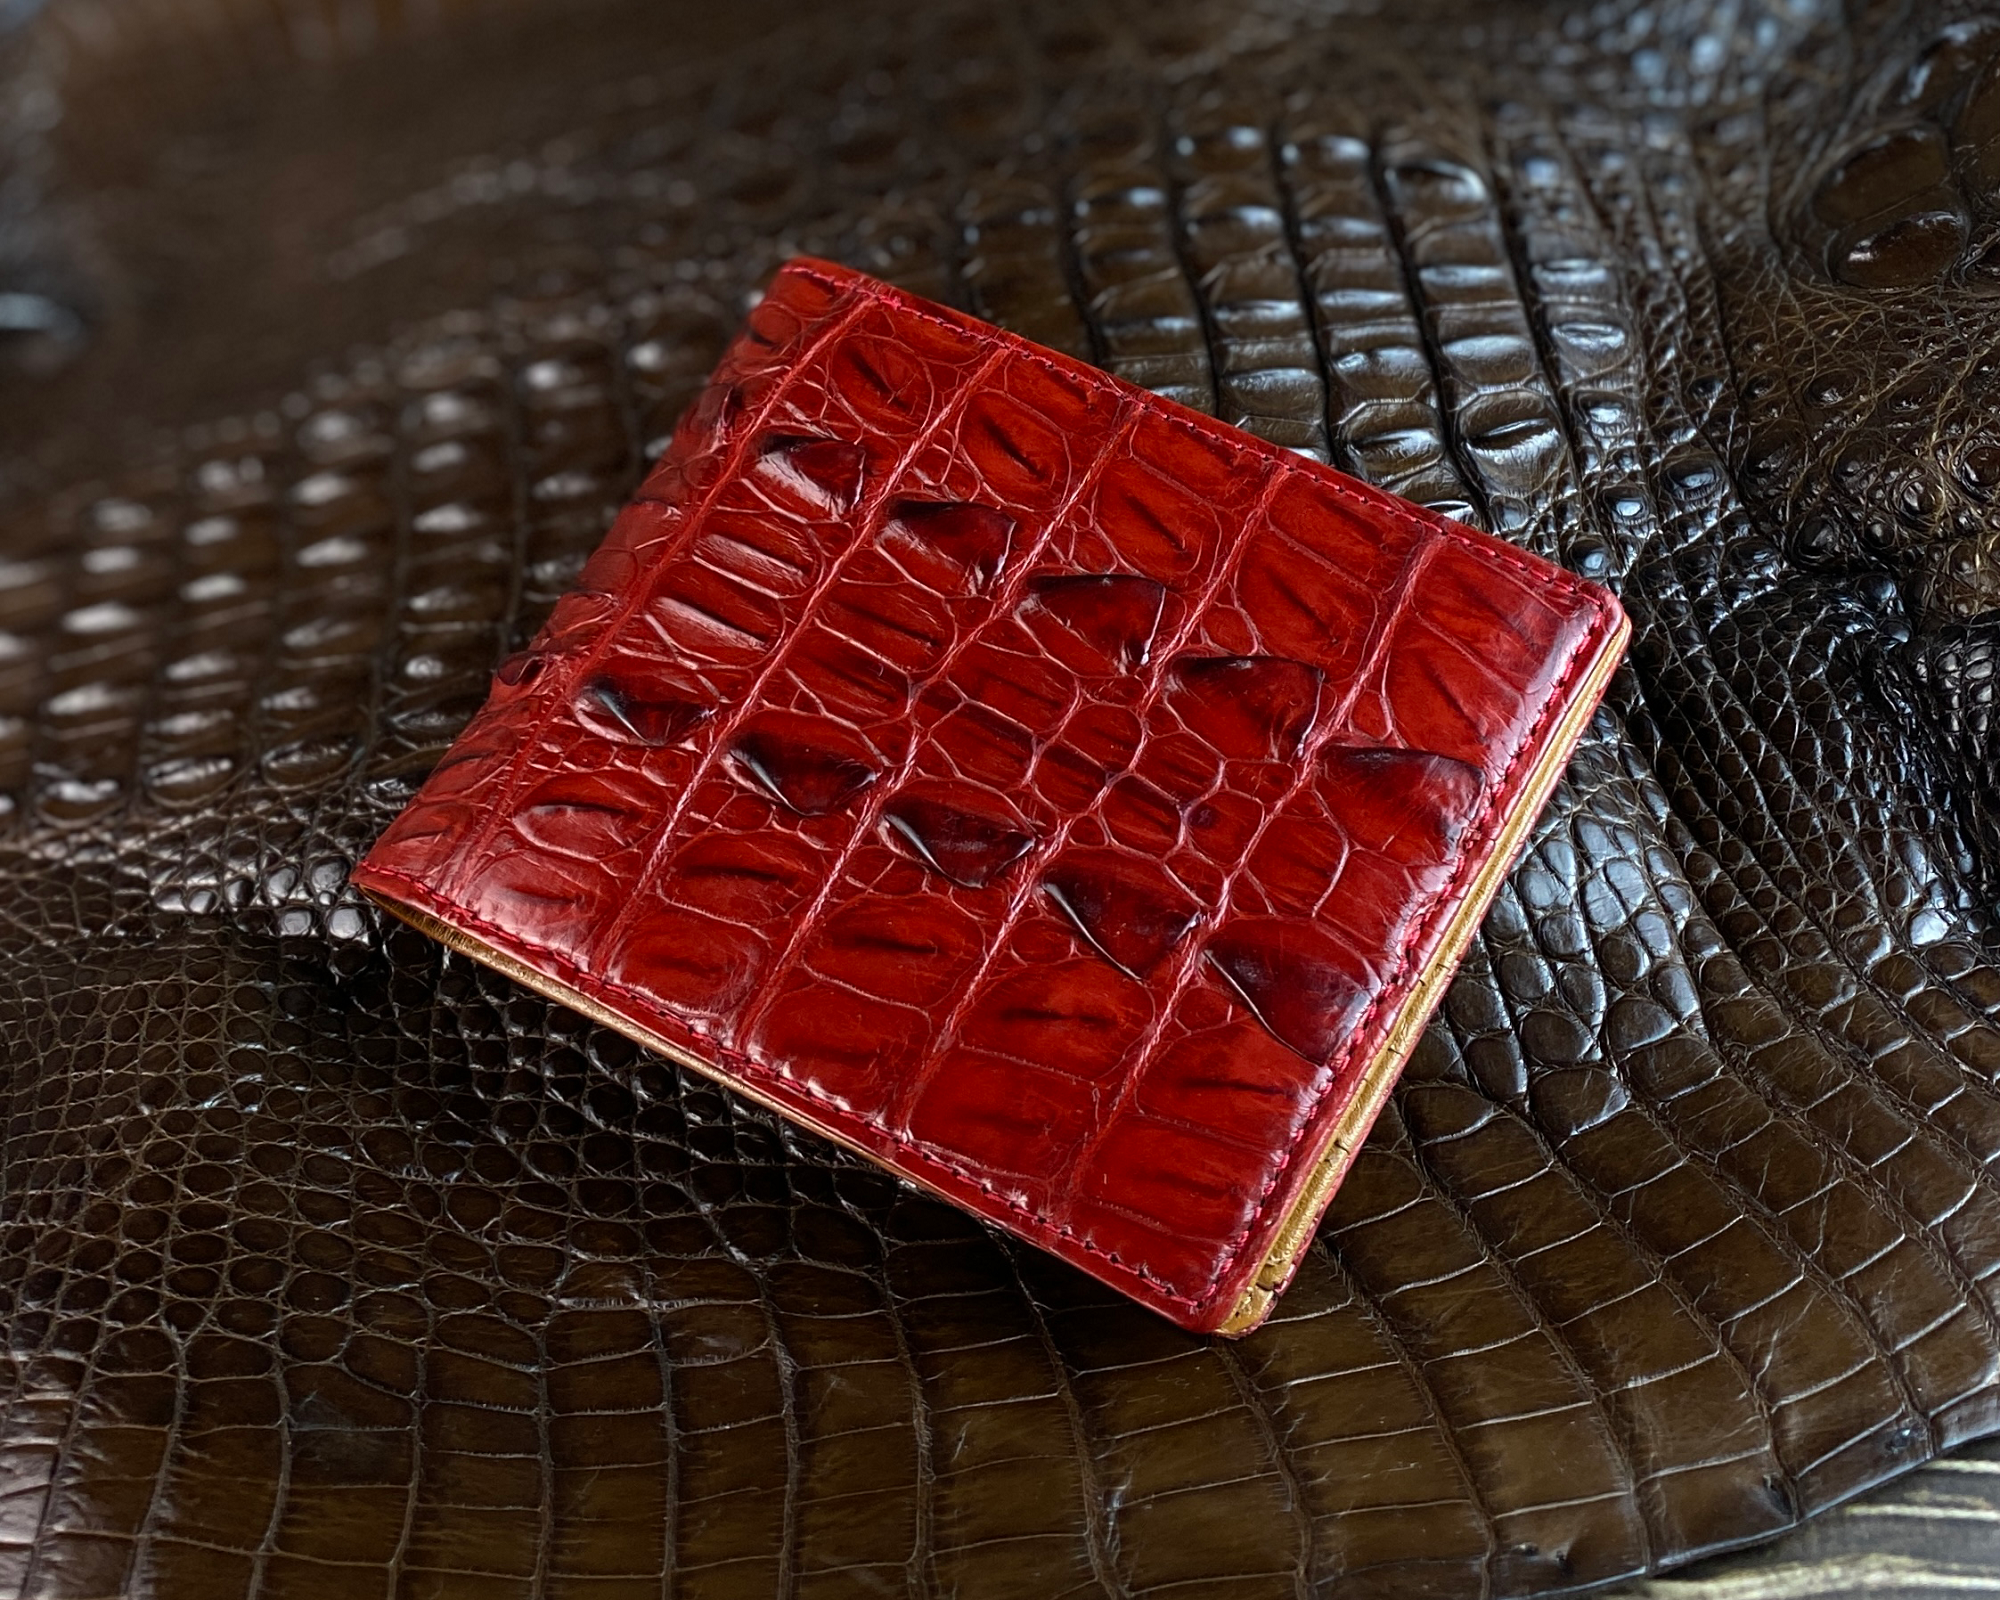 Men's Red Leather Wallet